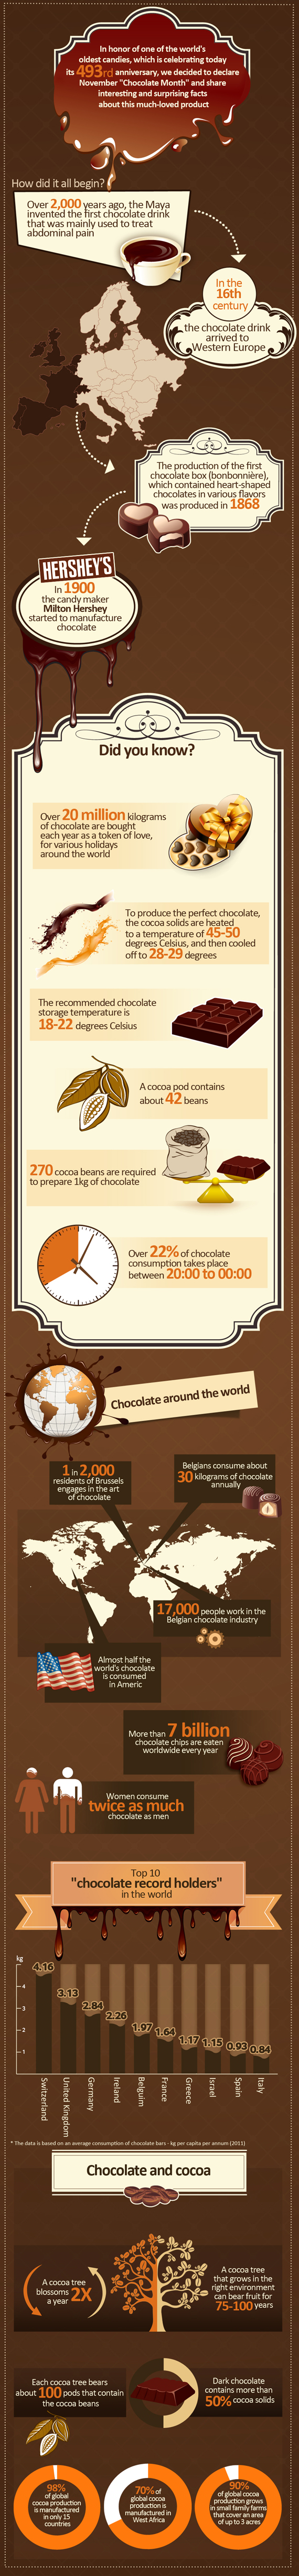 History and Timeline of Chocolate